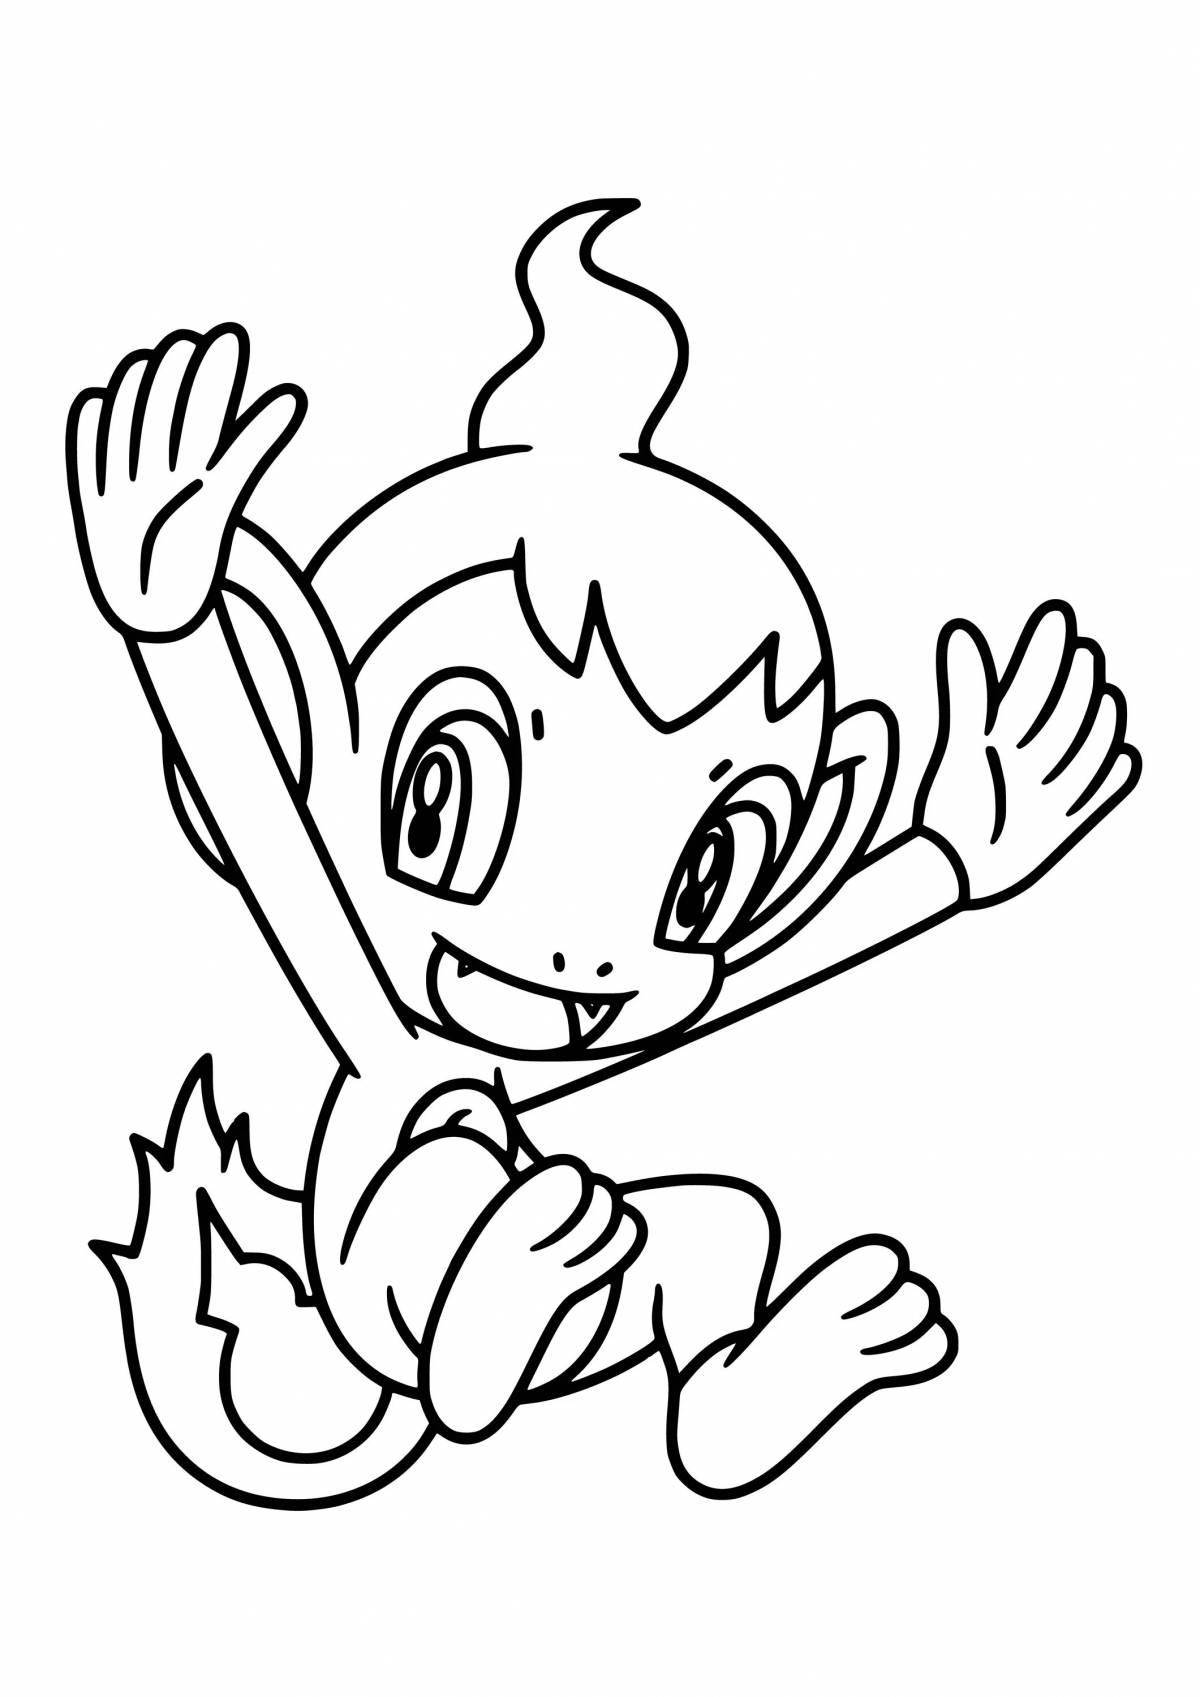 Coloring page adorable piplup pokemon